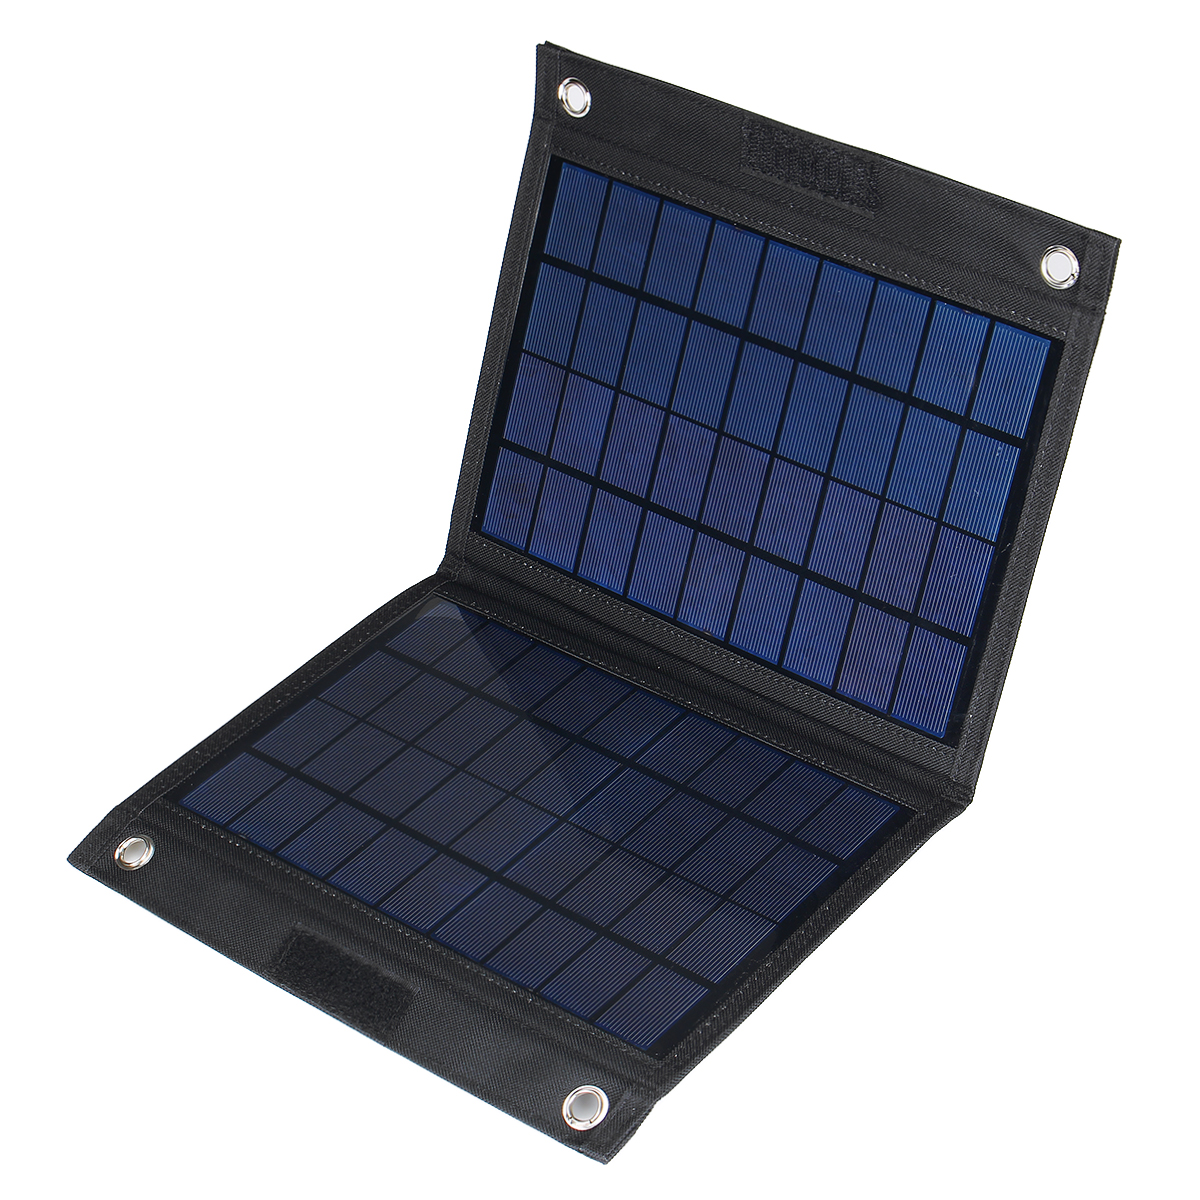 Sunpower 50W 18V Foldable Solar Panel Charger Solar Power Bank for Camping Hiking USB Backpacking Power Supply